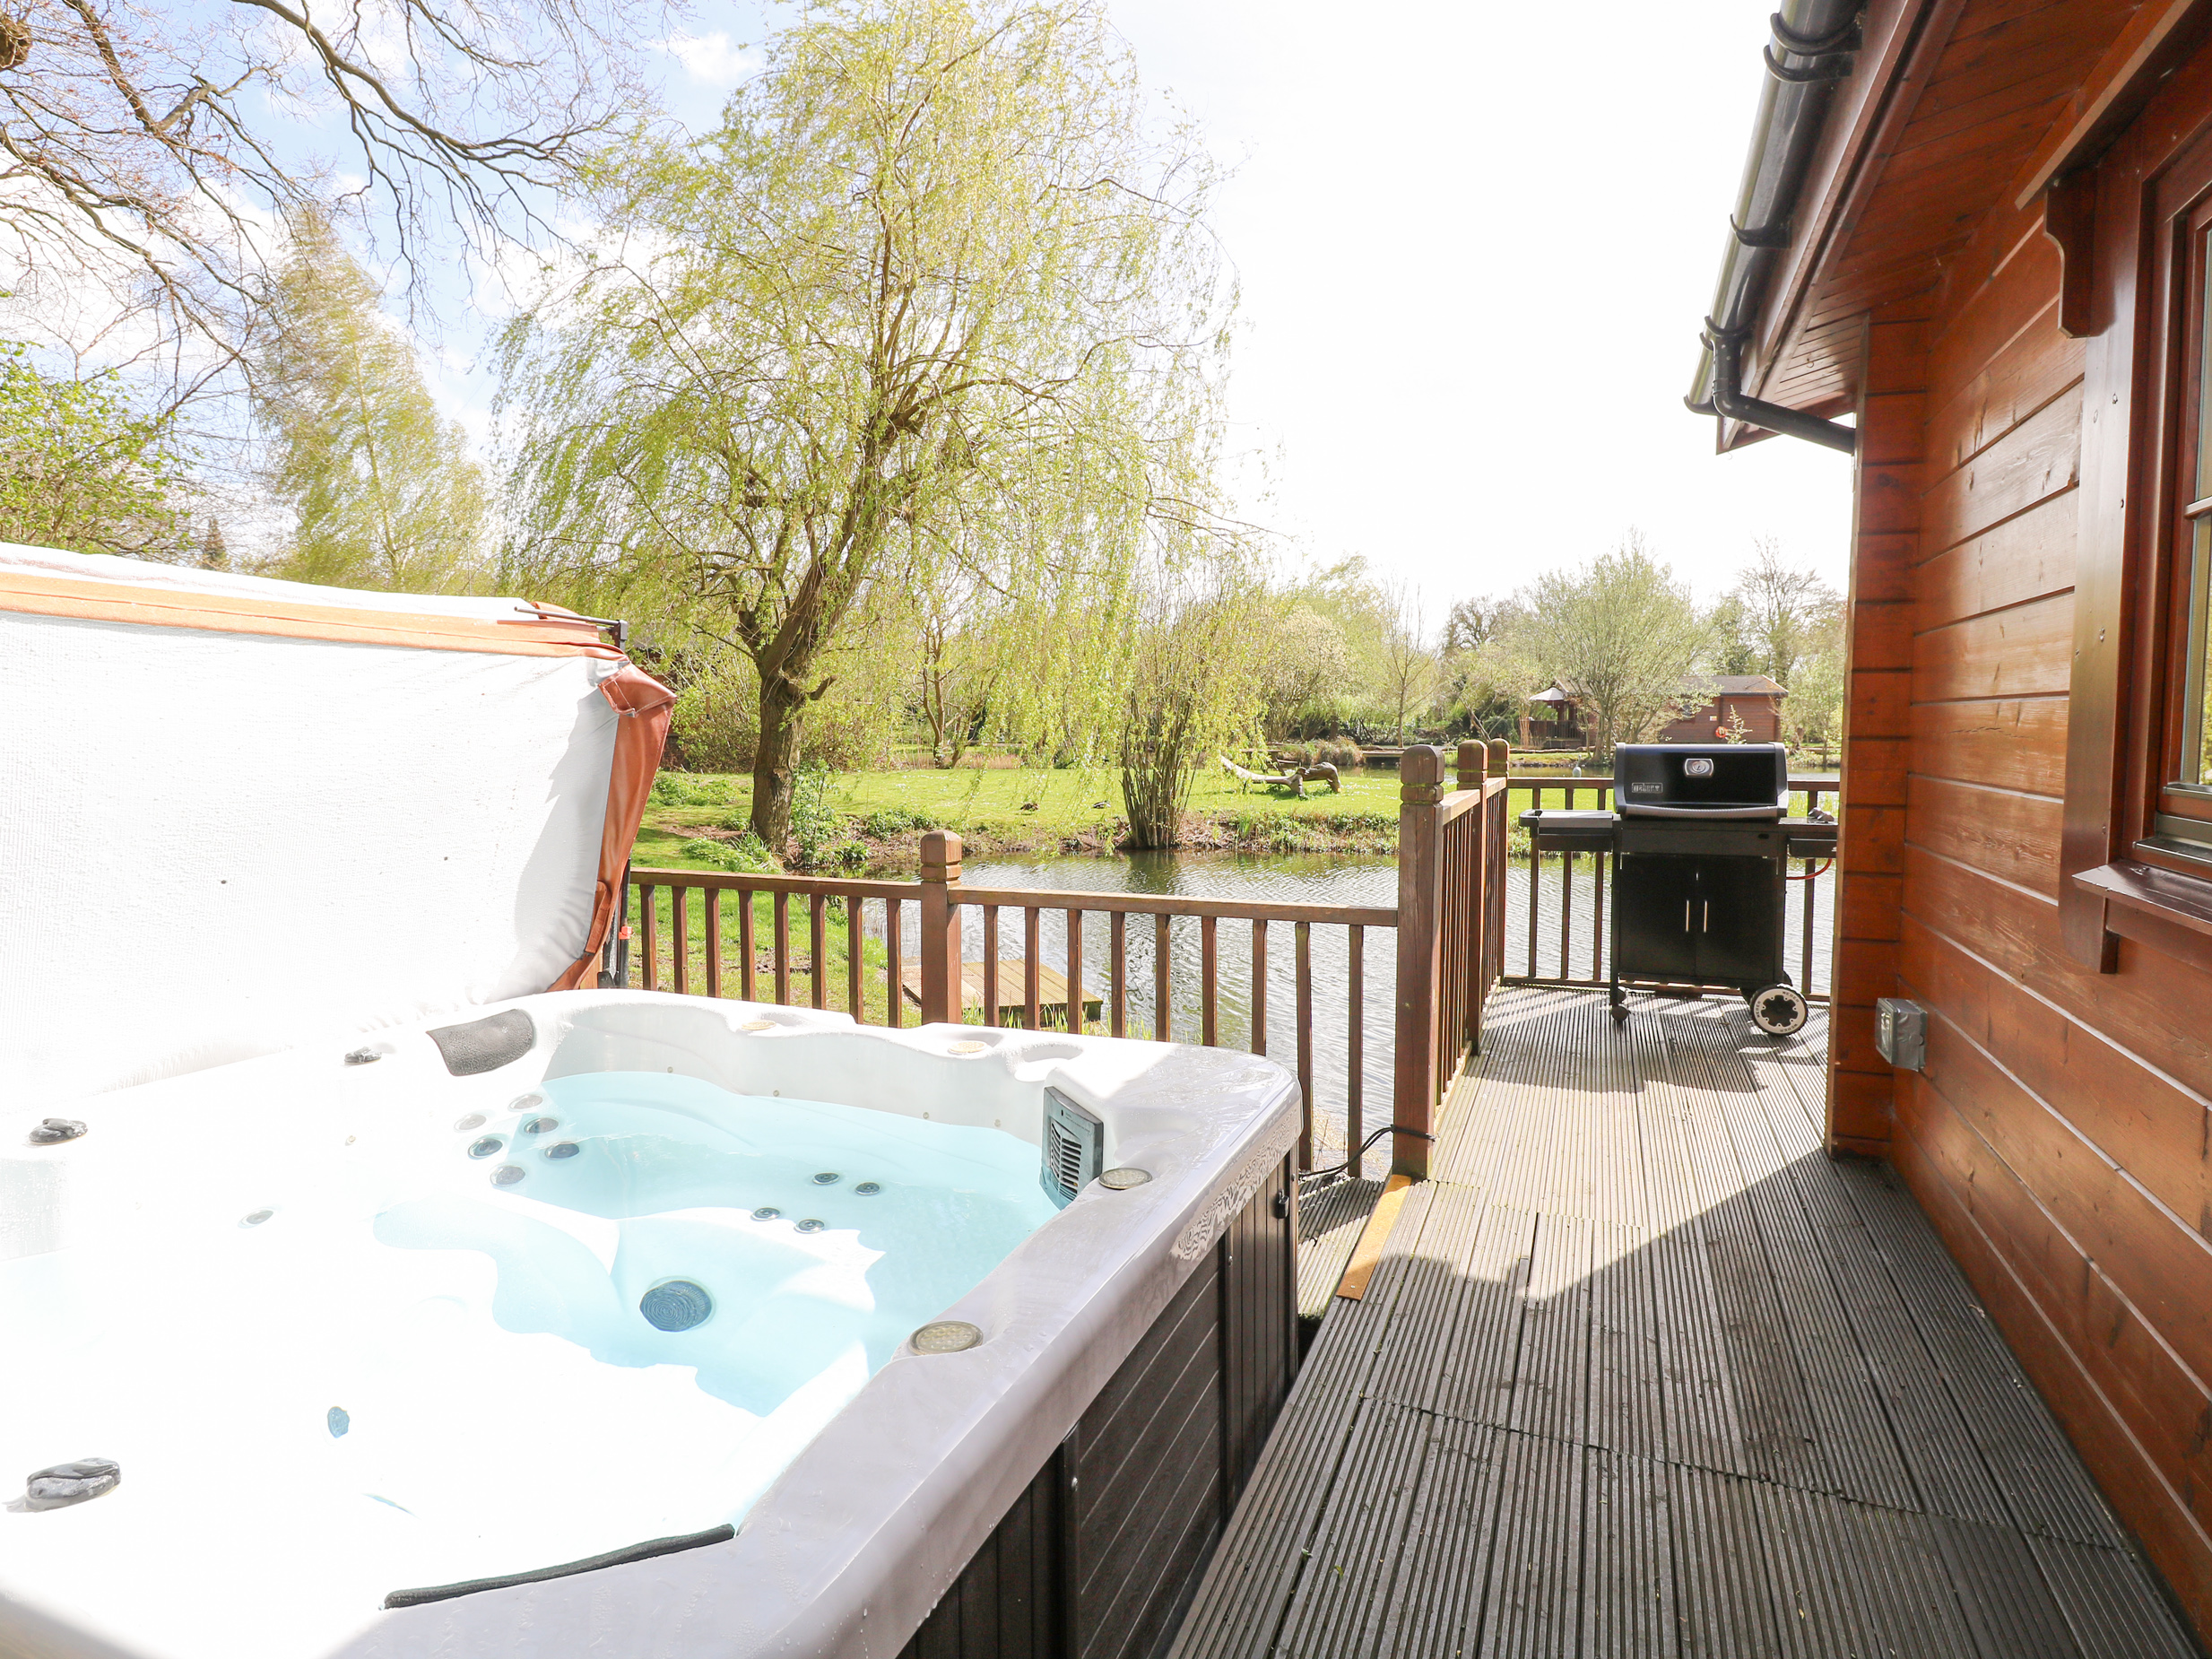 Heron Lodge, is in Badwell Ash, Suffolk. Lake views. Decking with hot tub and barbecue. Adults only.